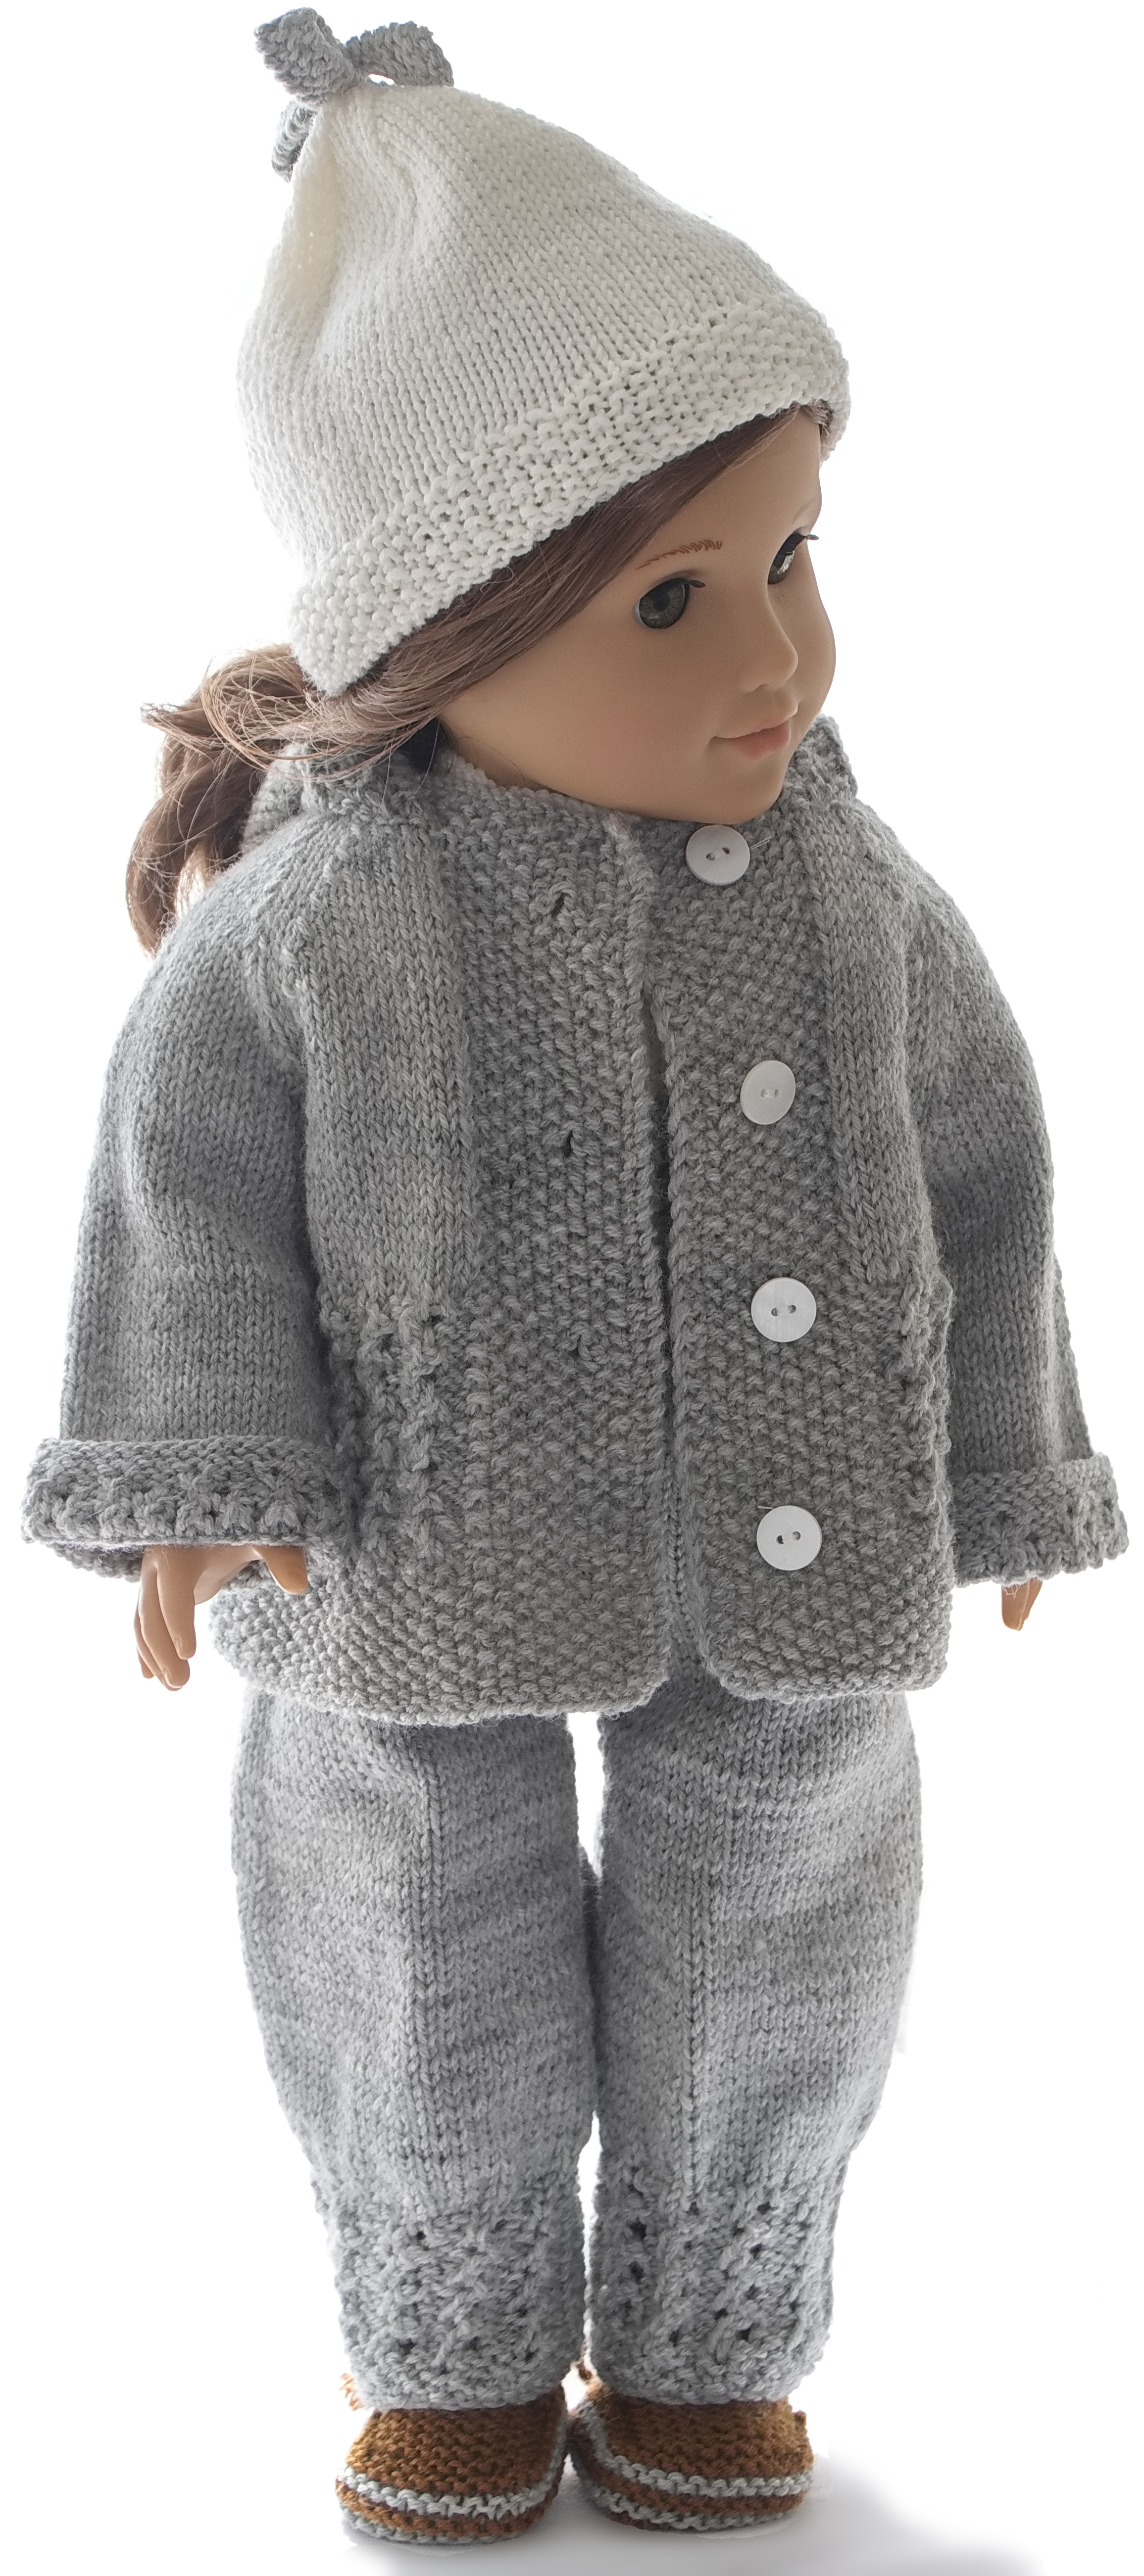 A superb jacket together with the pants for this knitting set.